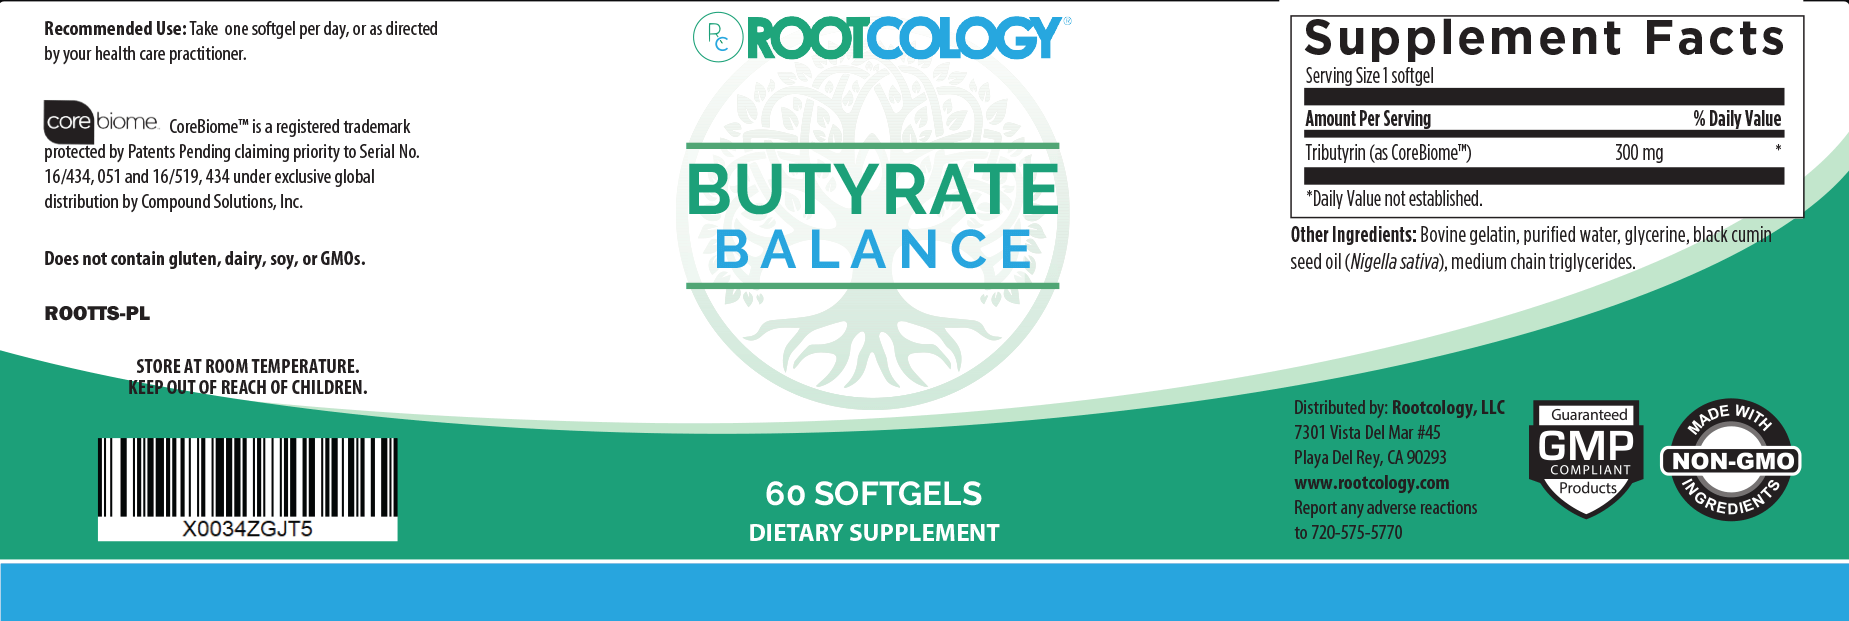 Rootcology Butyrate Balance Supplement Label